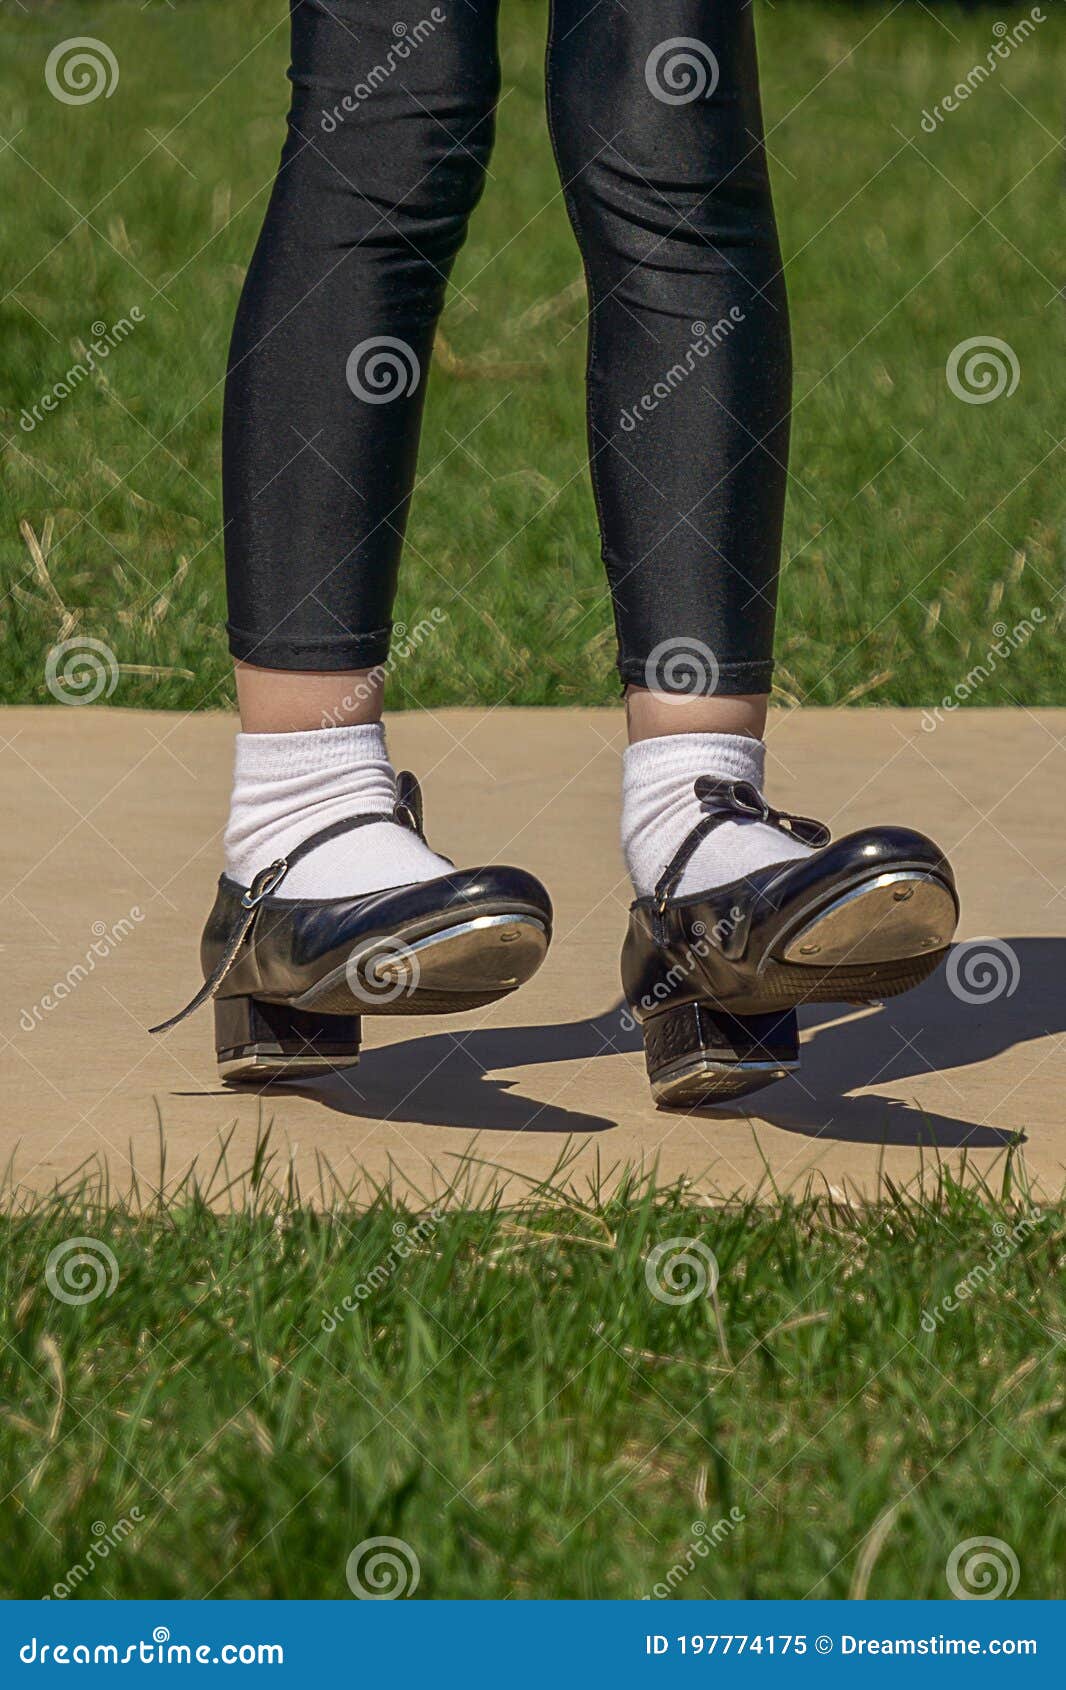 Legs and Feet of Young Girl in Black Tap Shoes, White Socks and